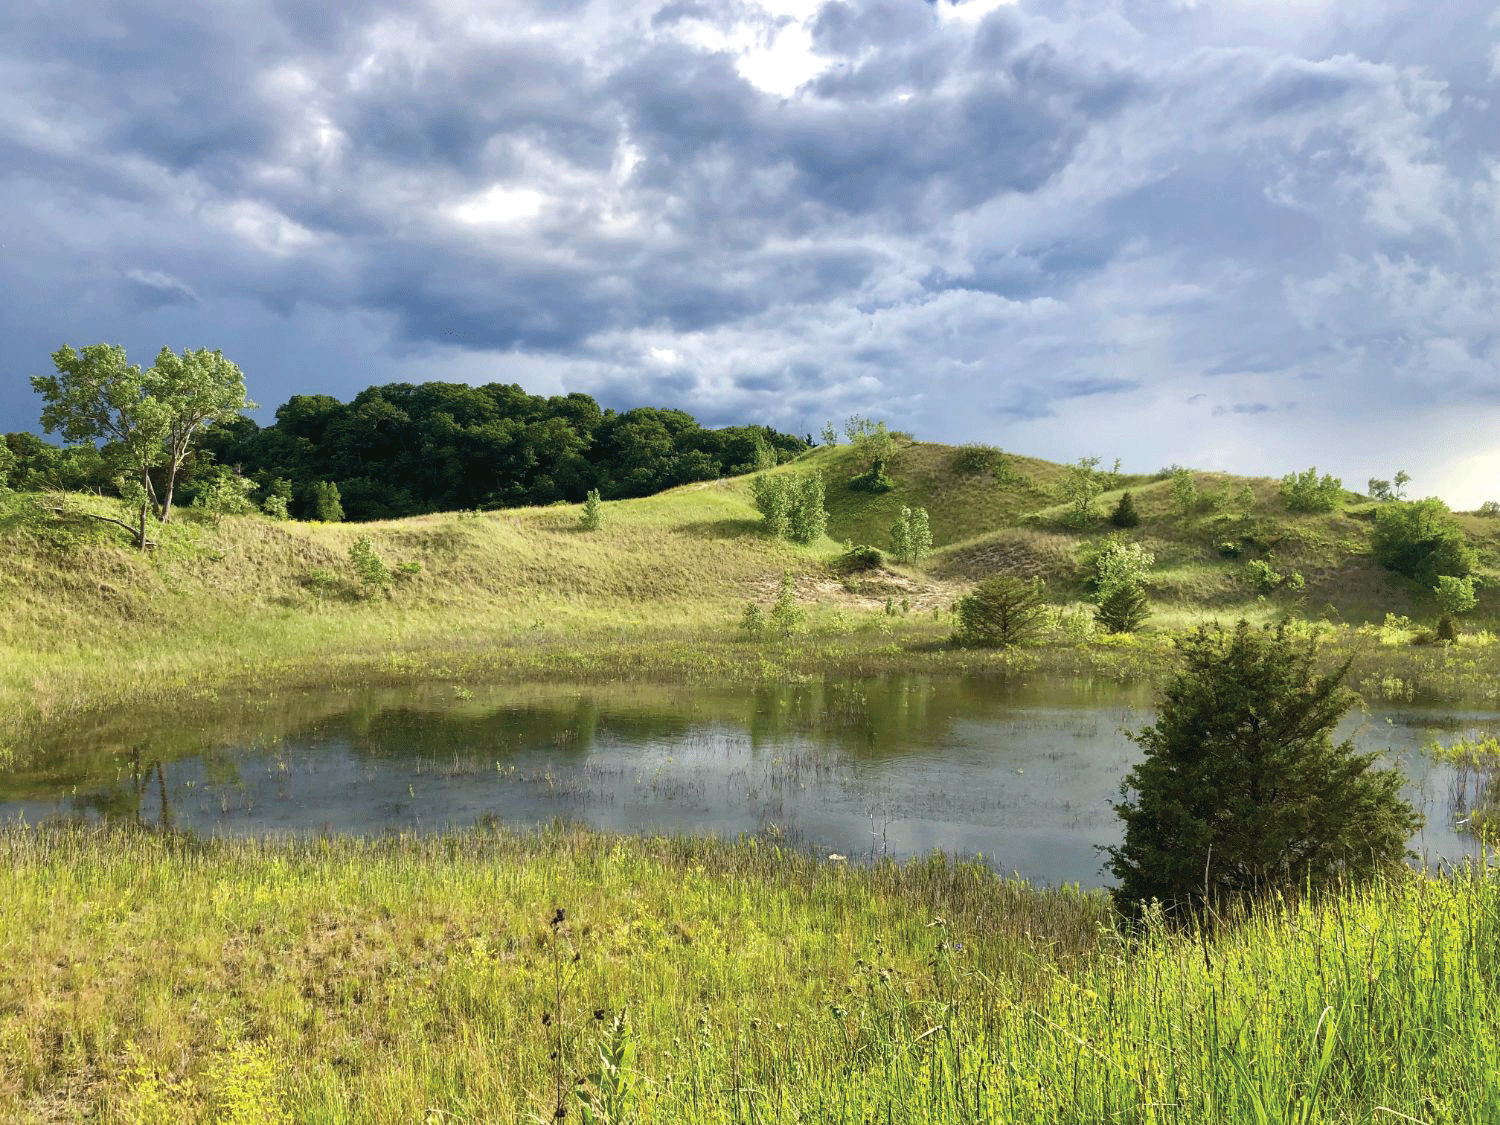 Photograph of a small pond surrounded by grass and small trees.